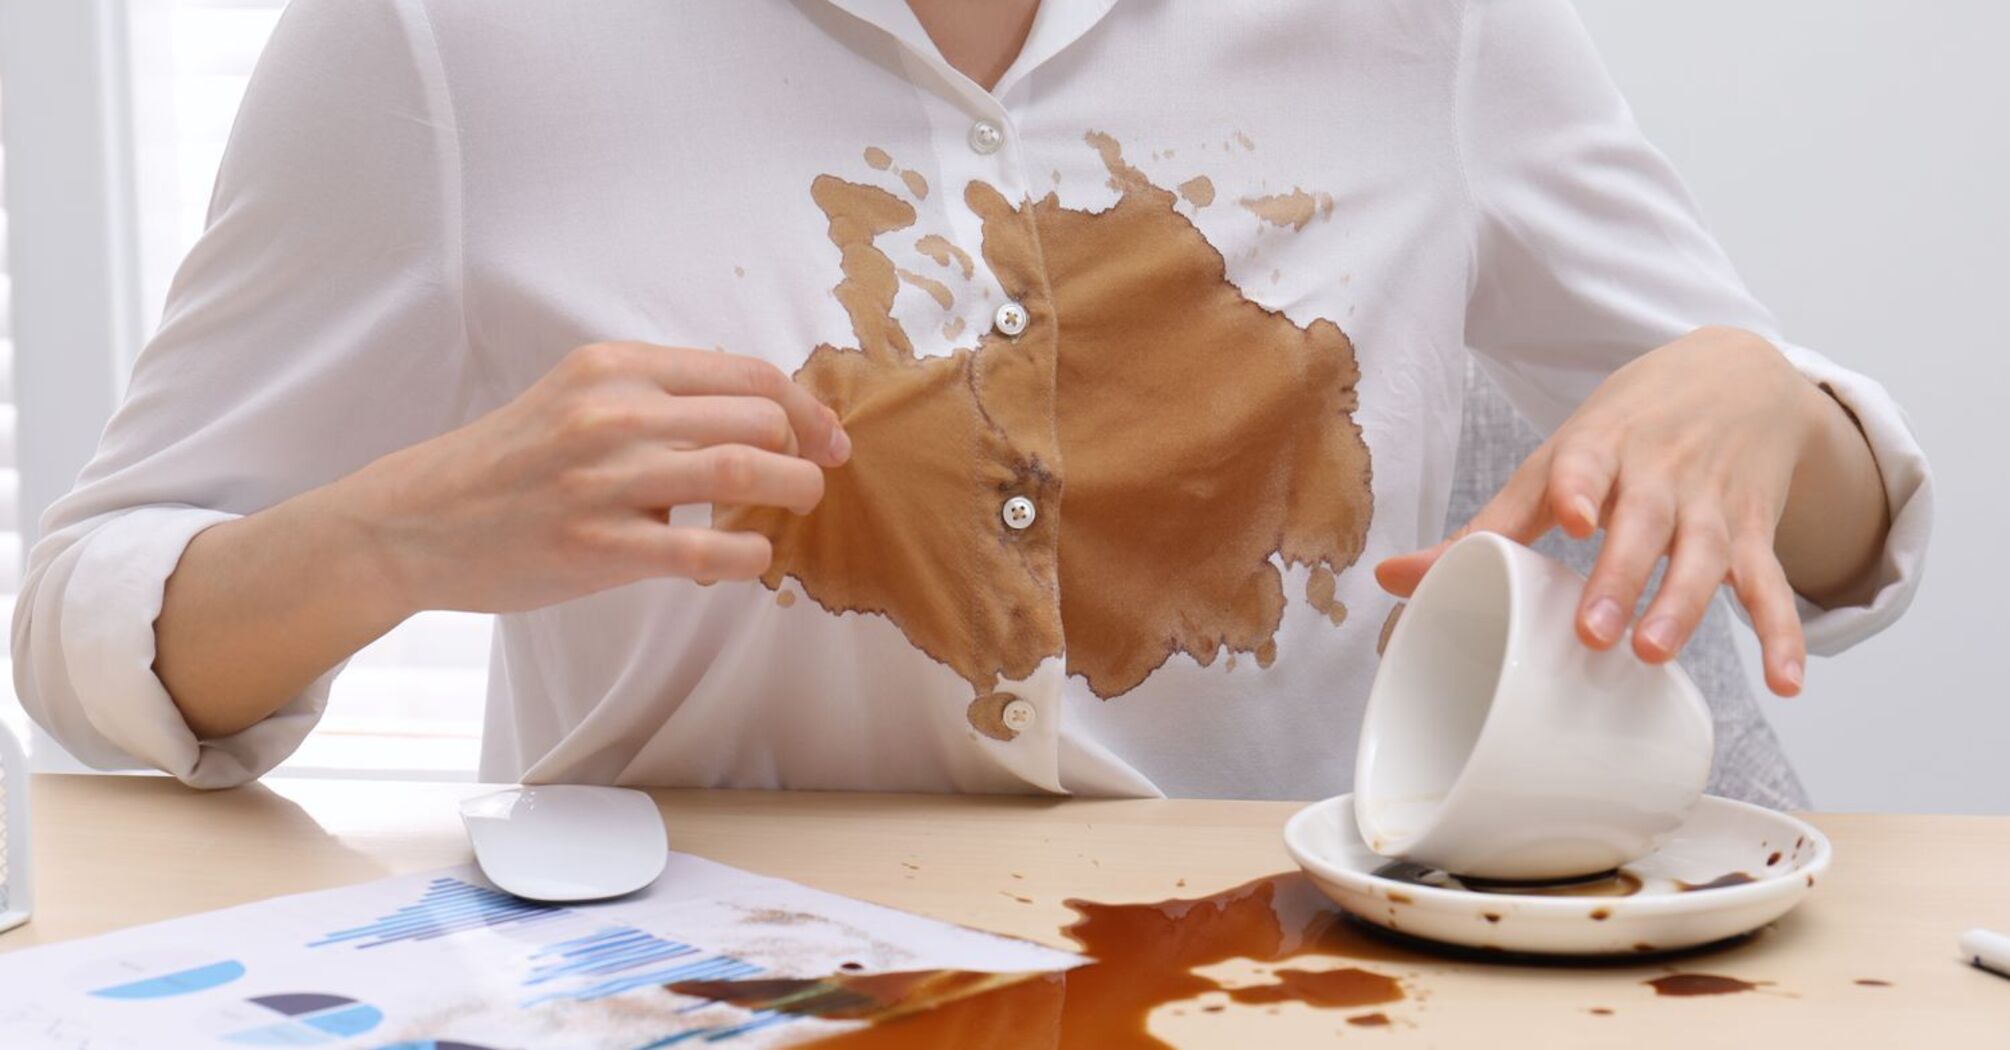 How to remove a coffee stain from white fabric